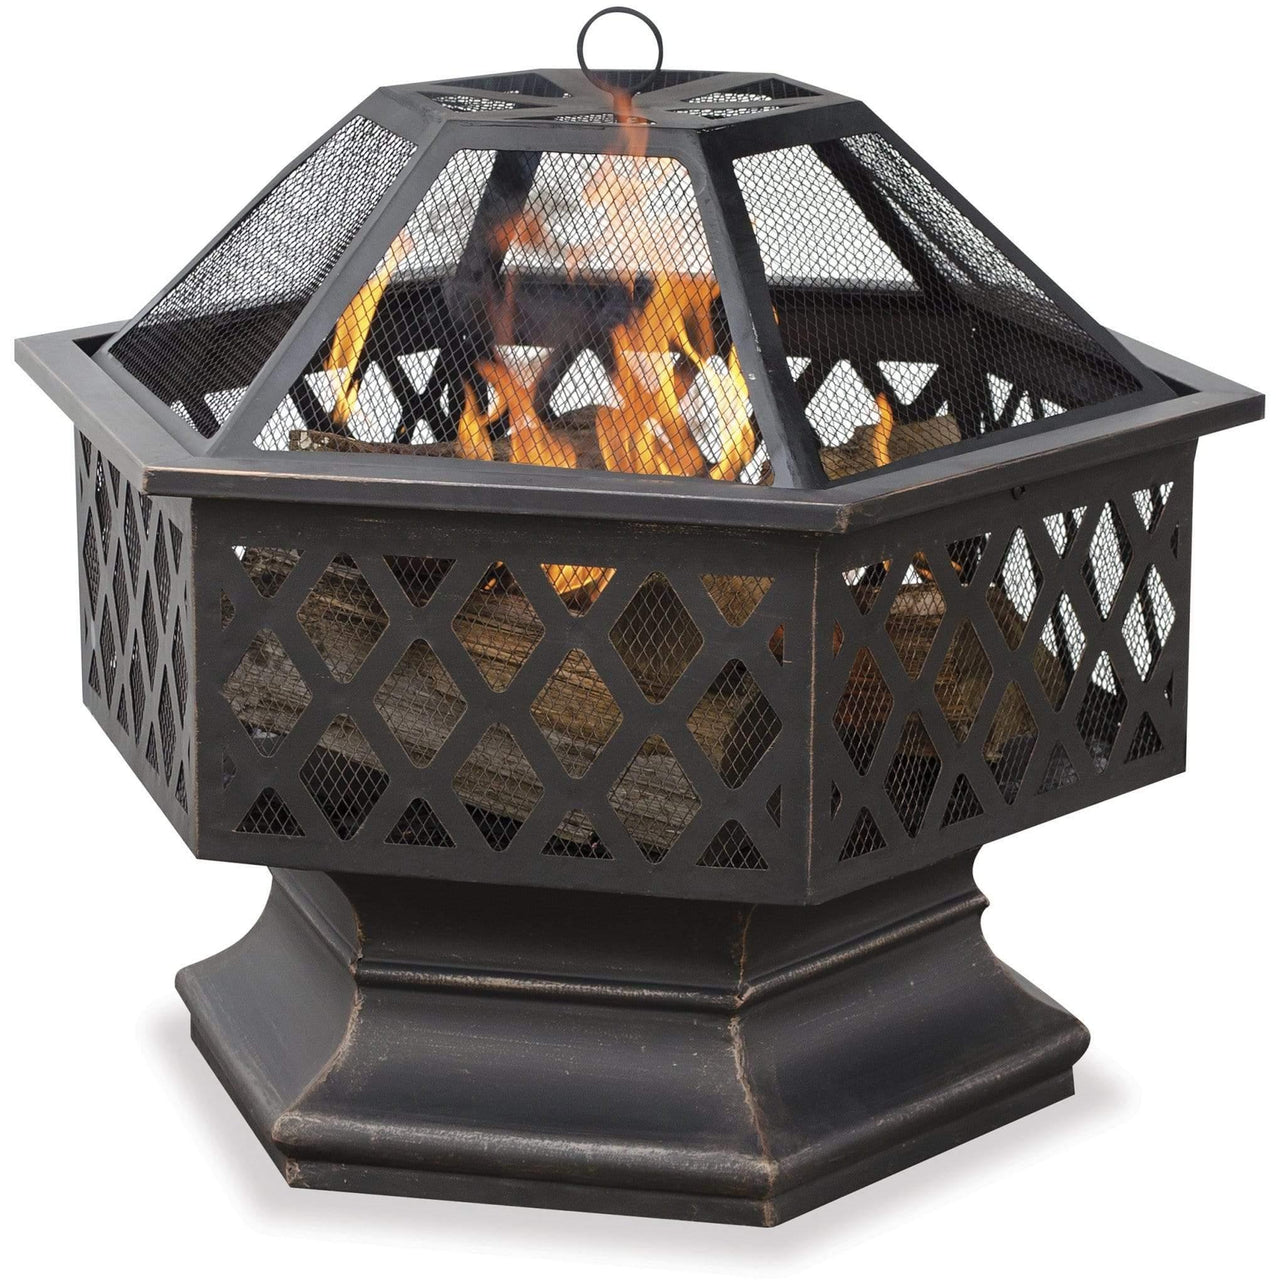 Endless Summer Oil Rubbed Bronze Wood Burning Outdoor Firebowl With Lattice Design - WAD1377SP - Fire Pit Stock